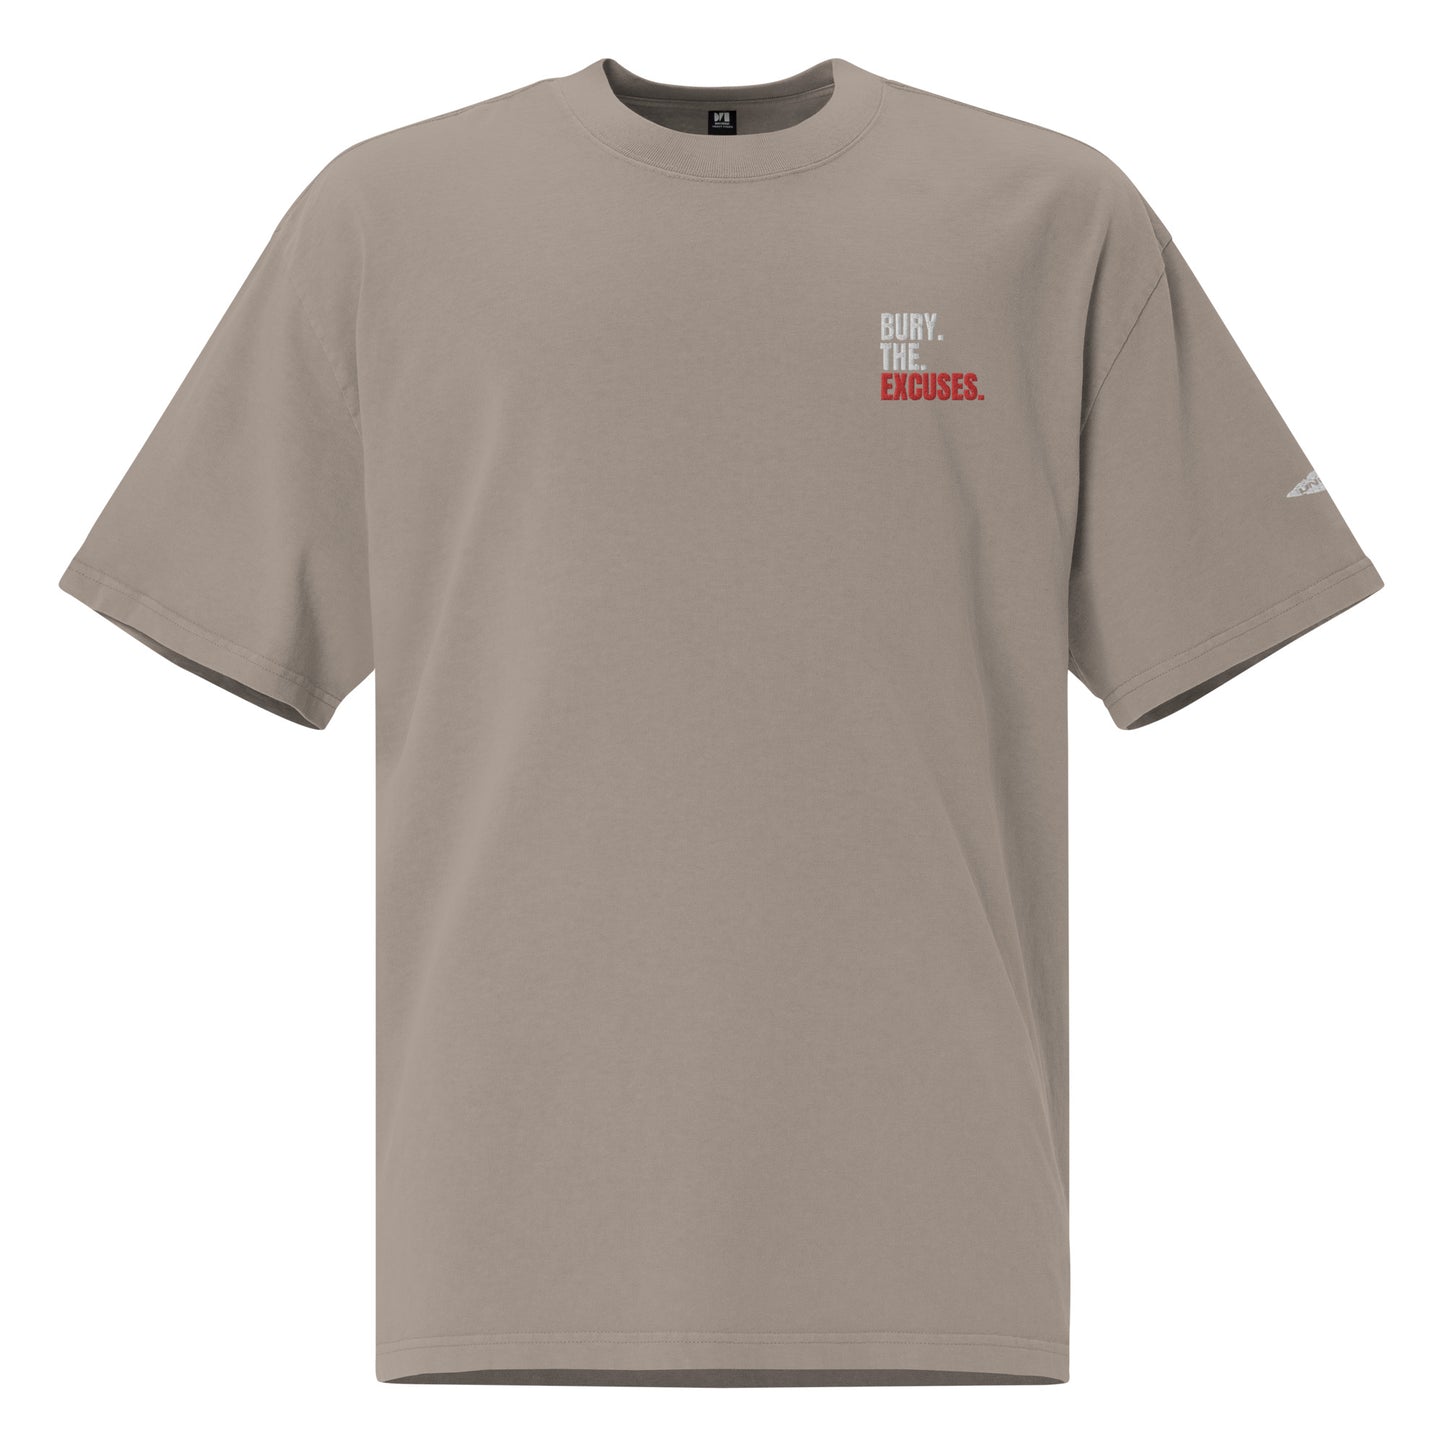 Bury The Excuses Oversized Faded T-Shirt - faded grey.